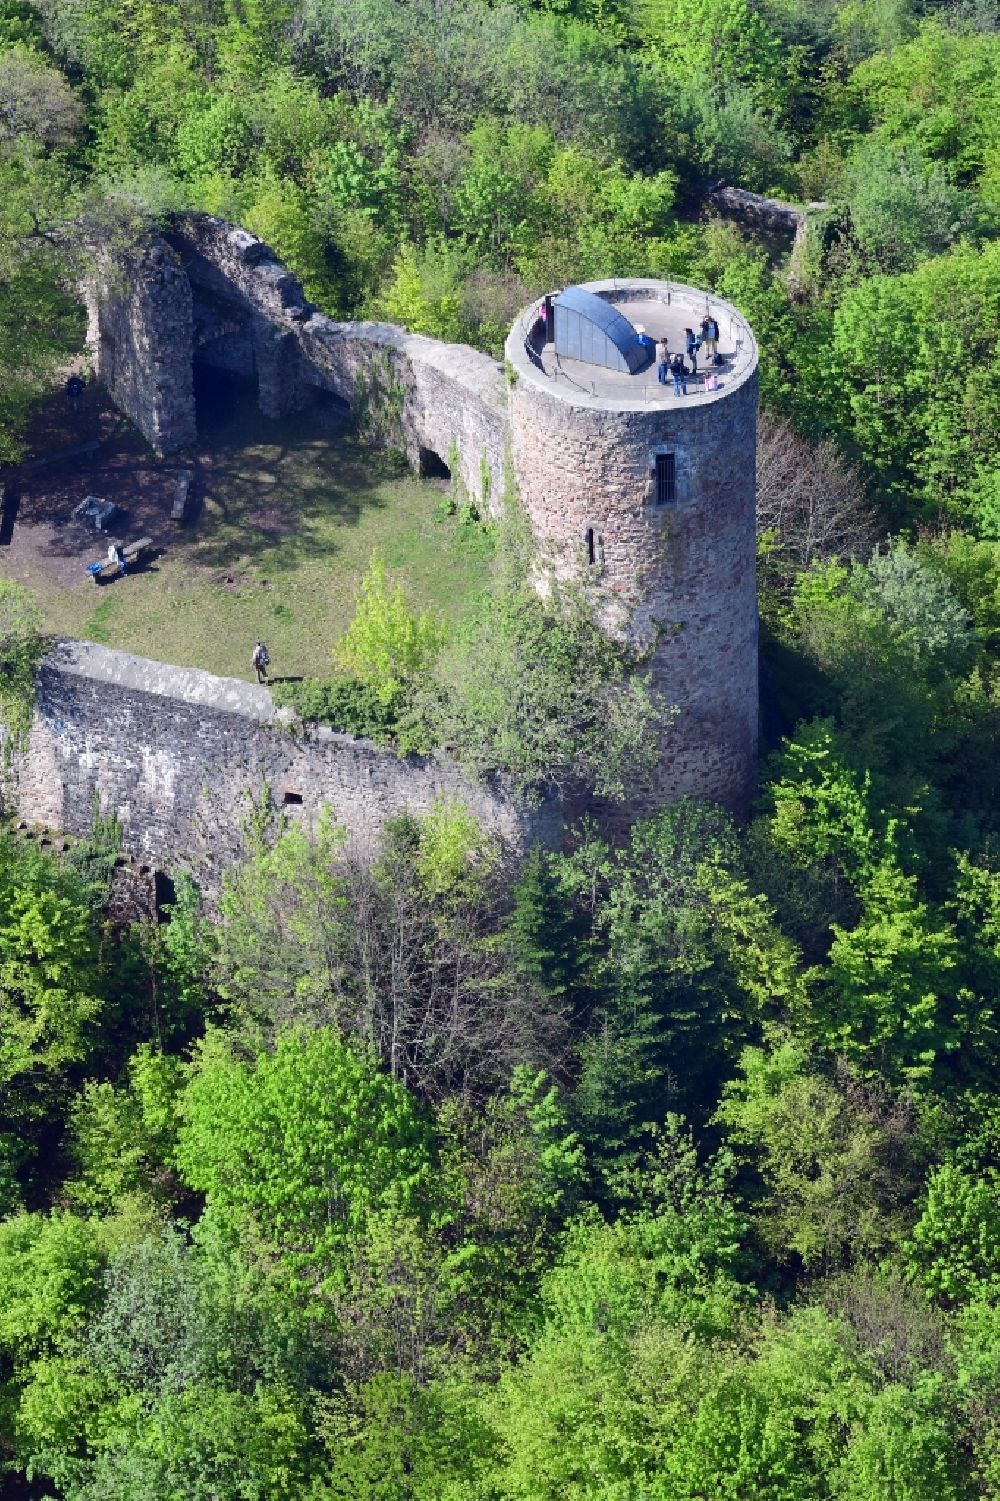 Kandern from the bird's eye view: In the area of Kandern in the state of Baden-Wuerttemberg, the ruins of Sausenburg can be found. The ruins are open to visitors